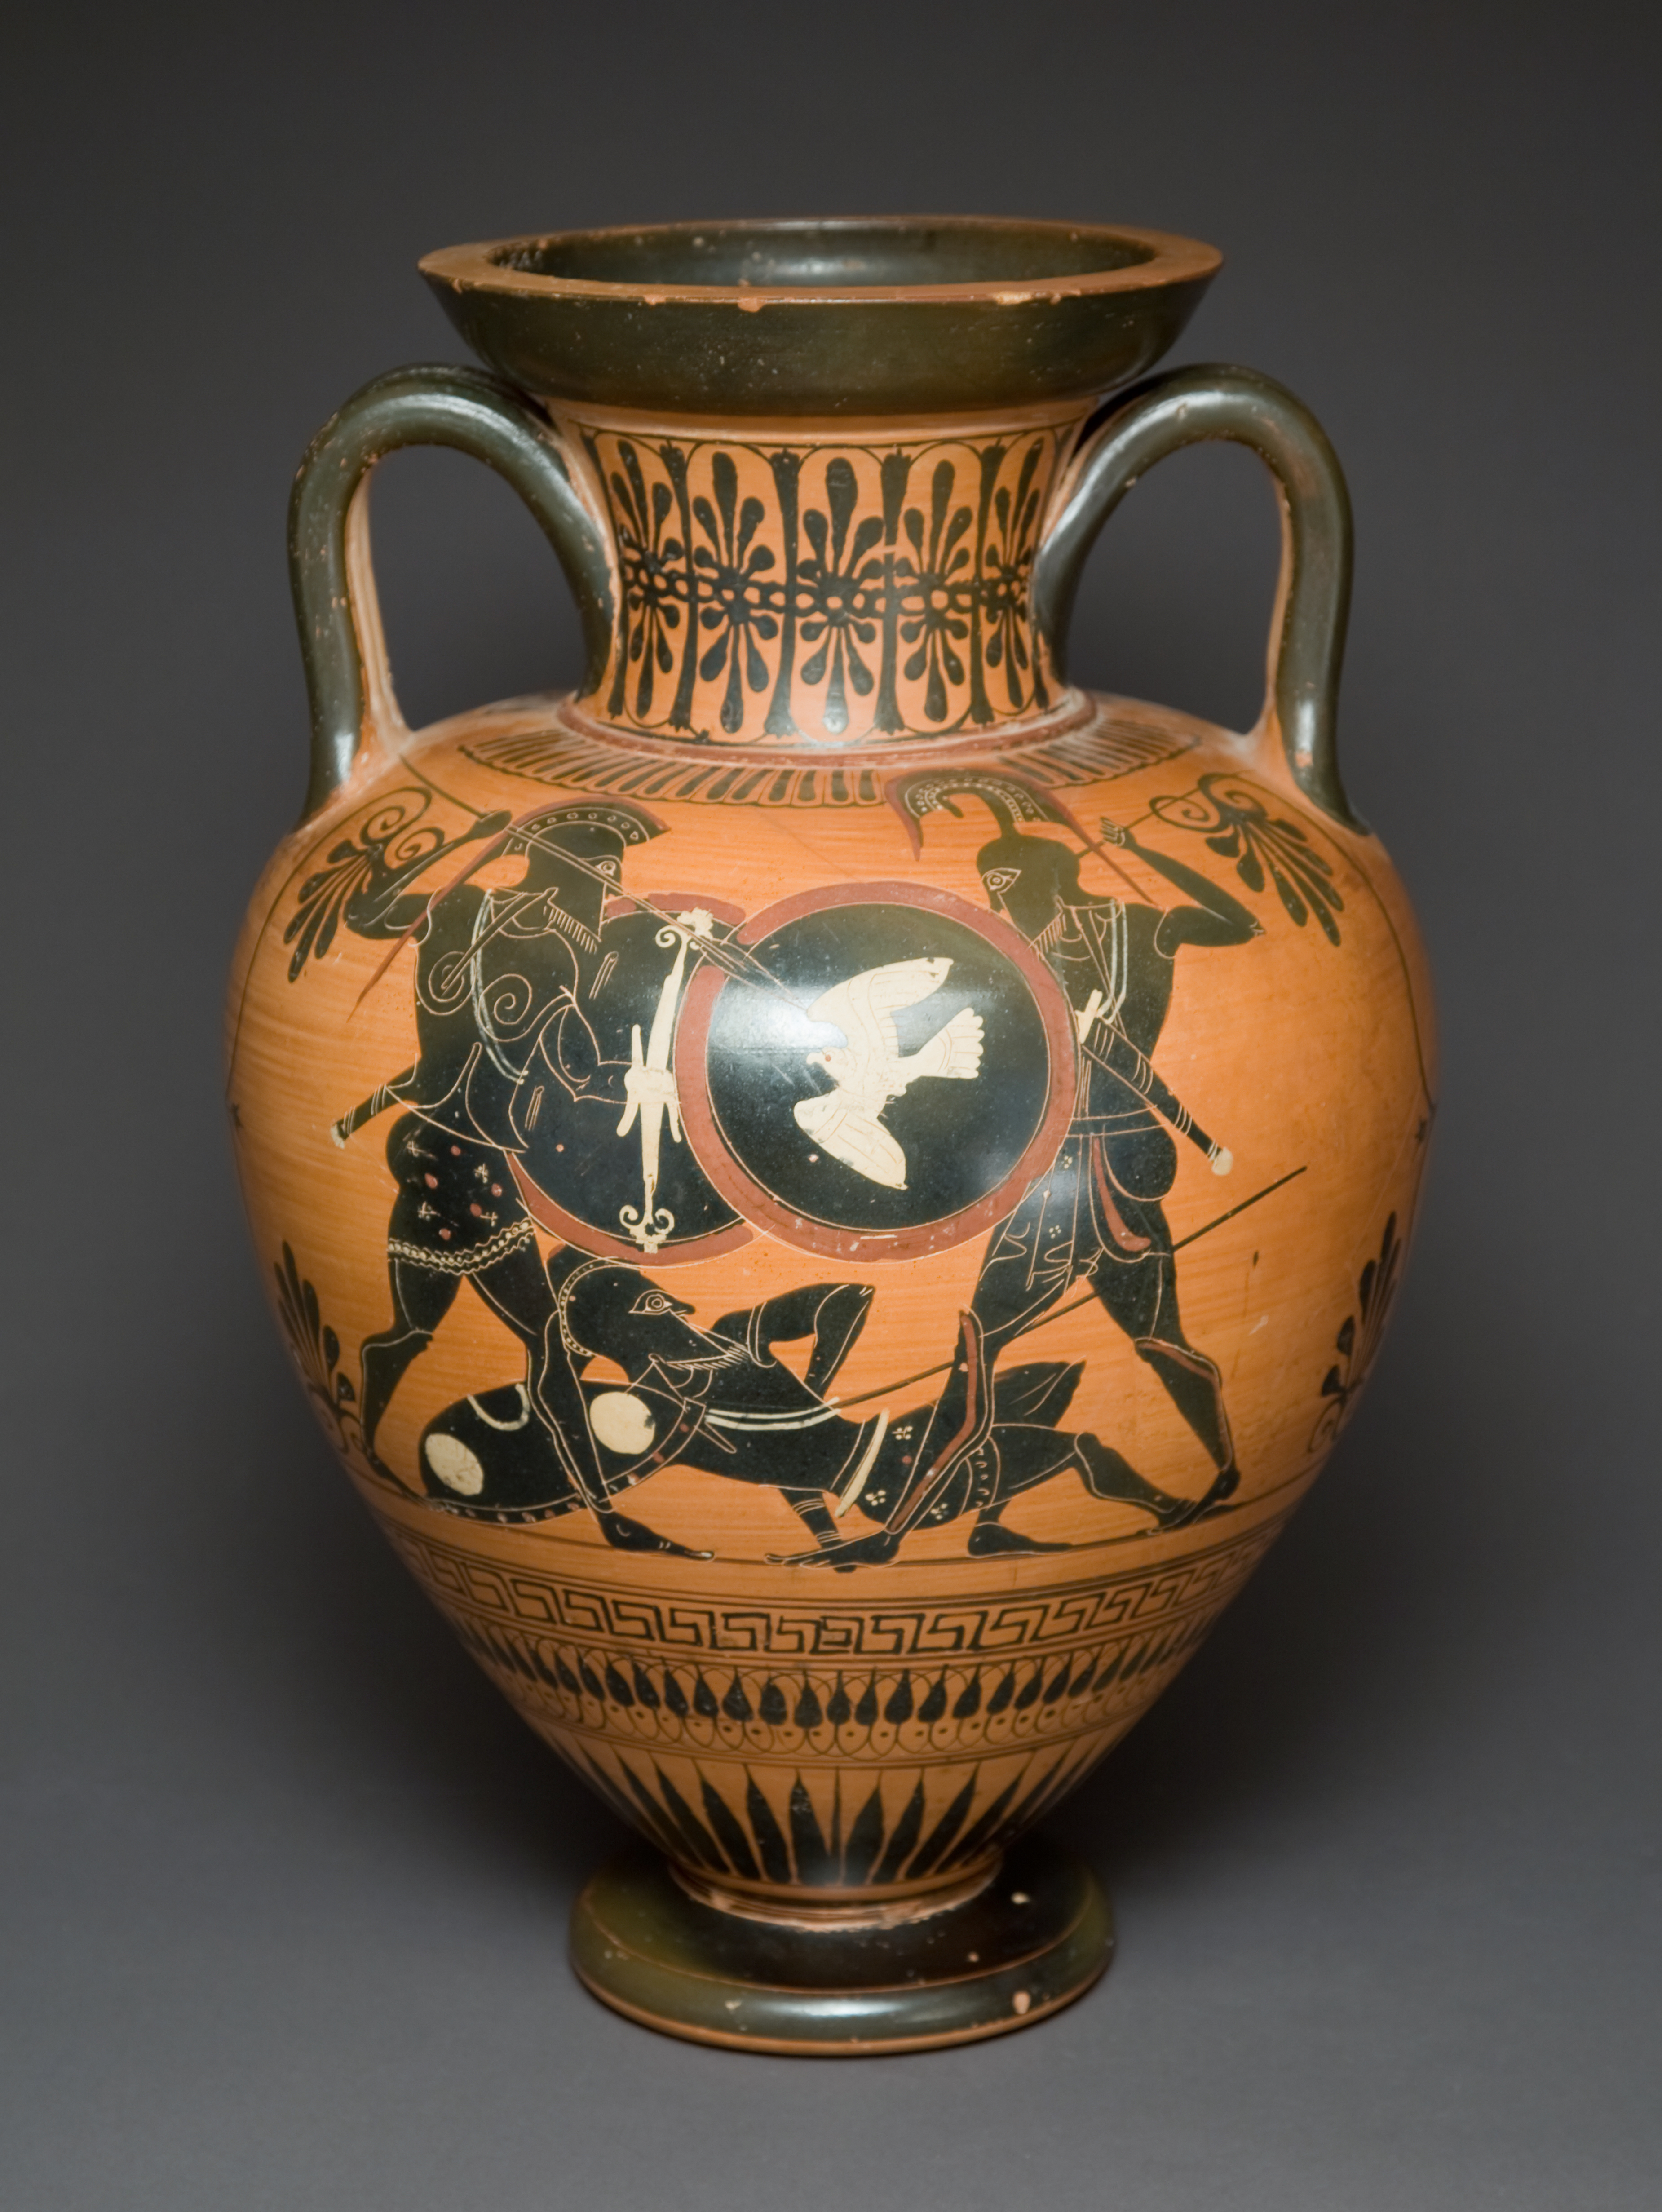 A black-figure amphora with three soldiers and a bird on it.